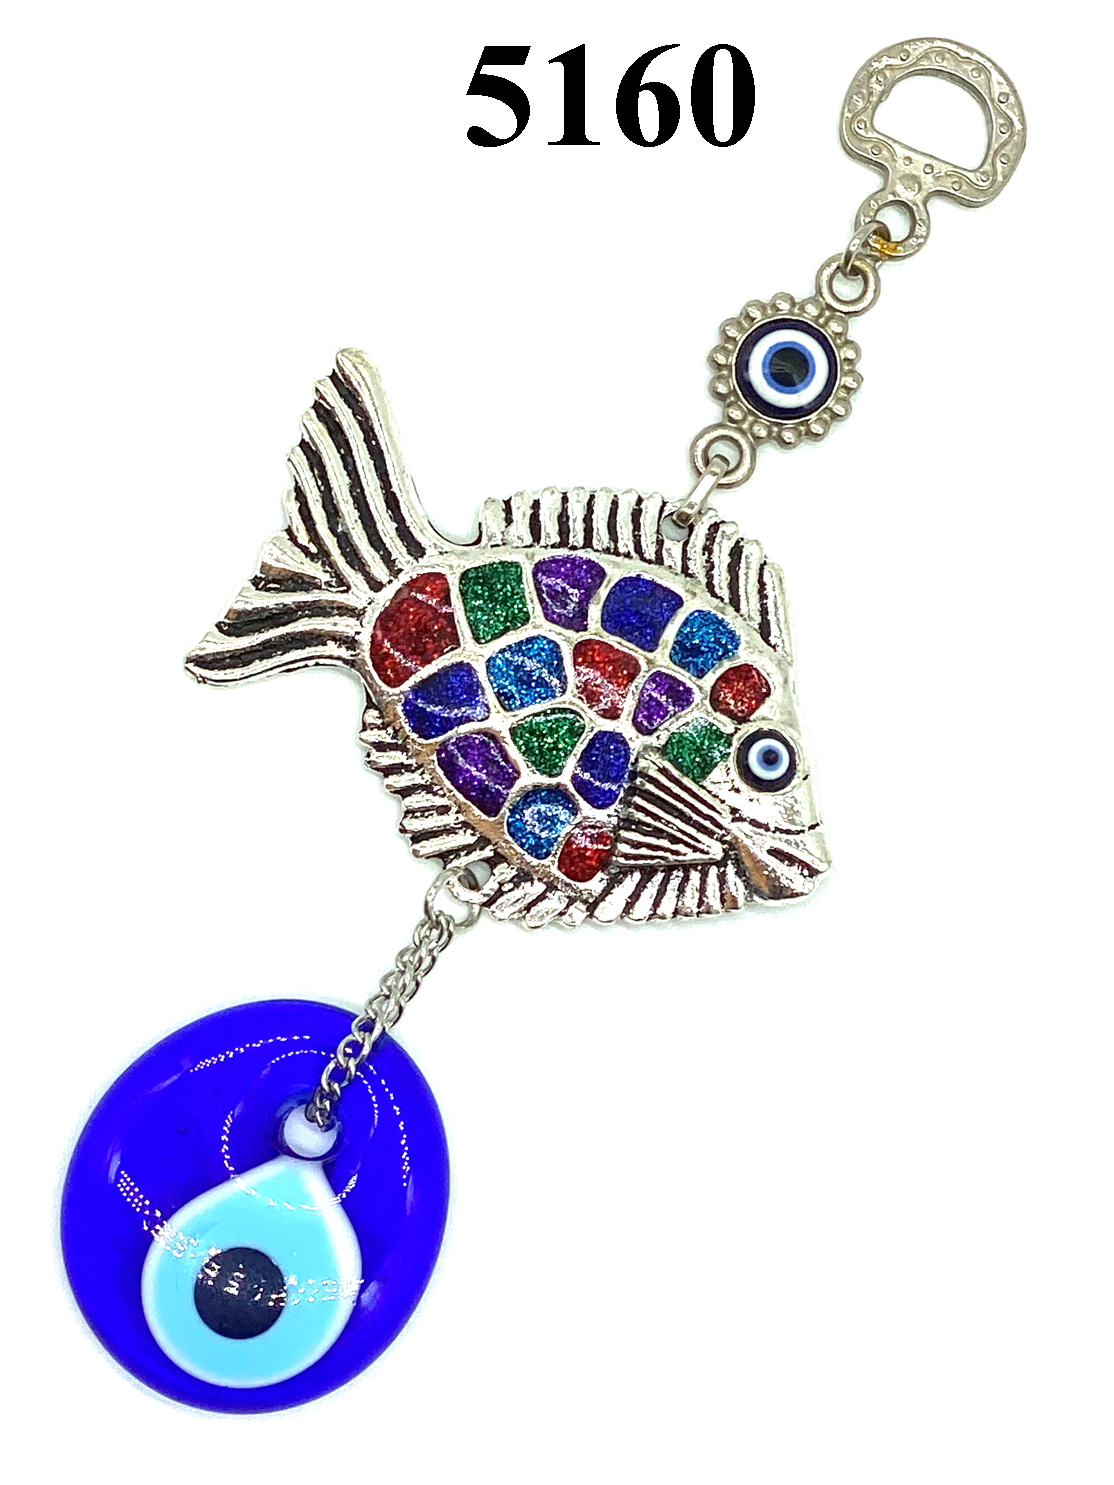 Colorful Fish with Glass Evil Eye Wall Decor #5160